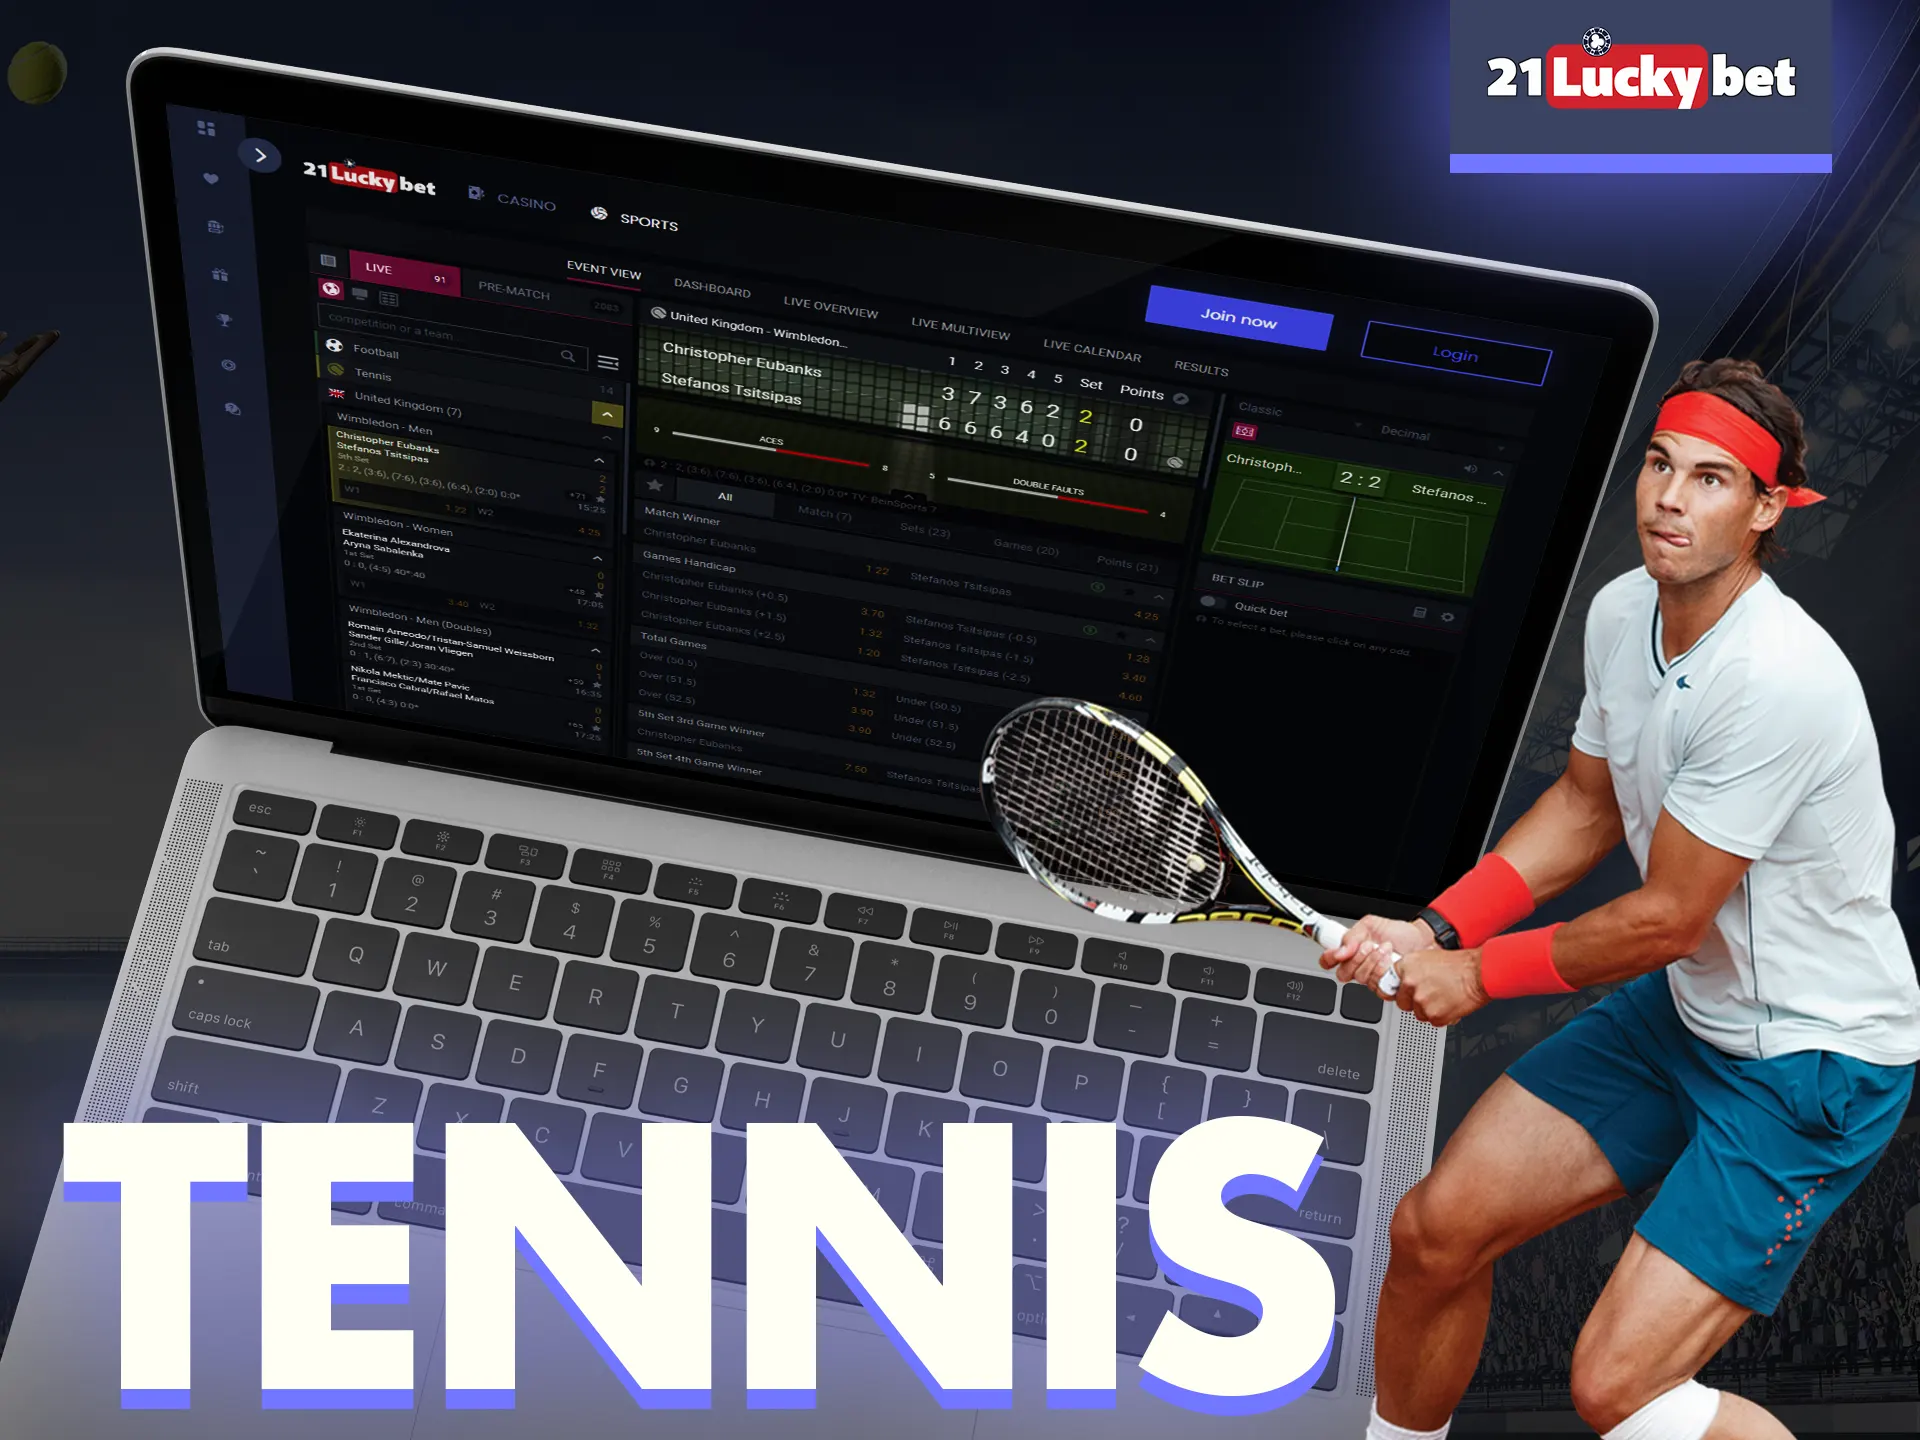 Bet on tennis with 21luckybet.